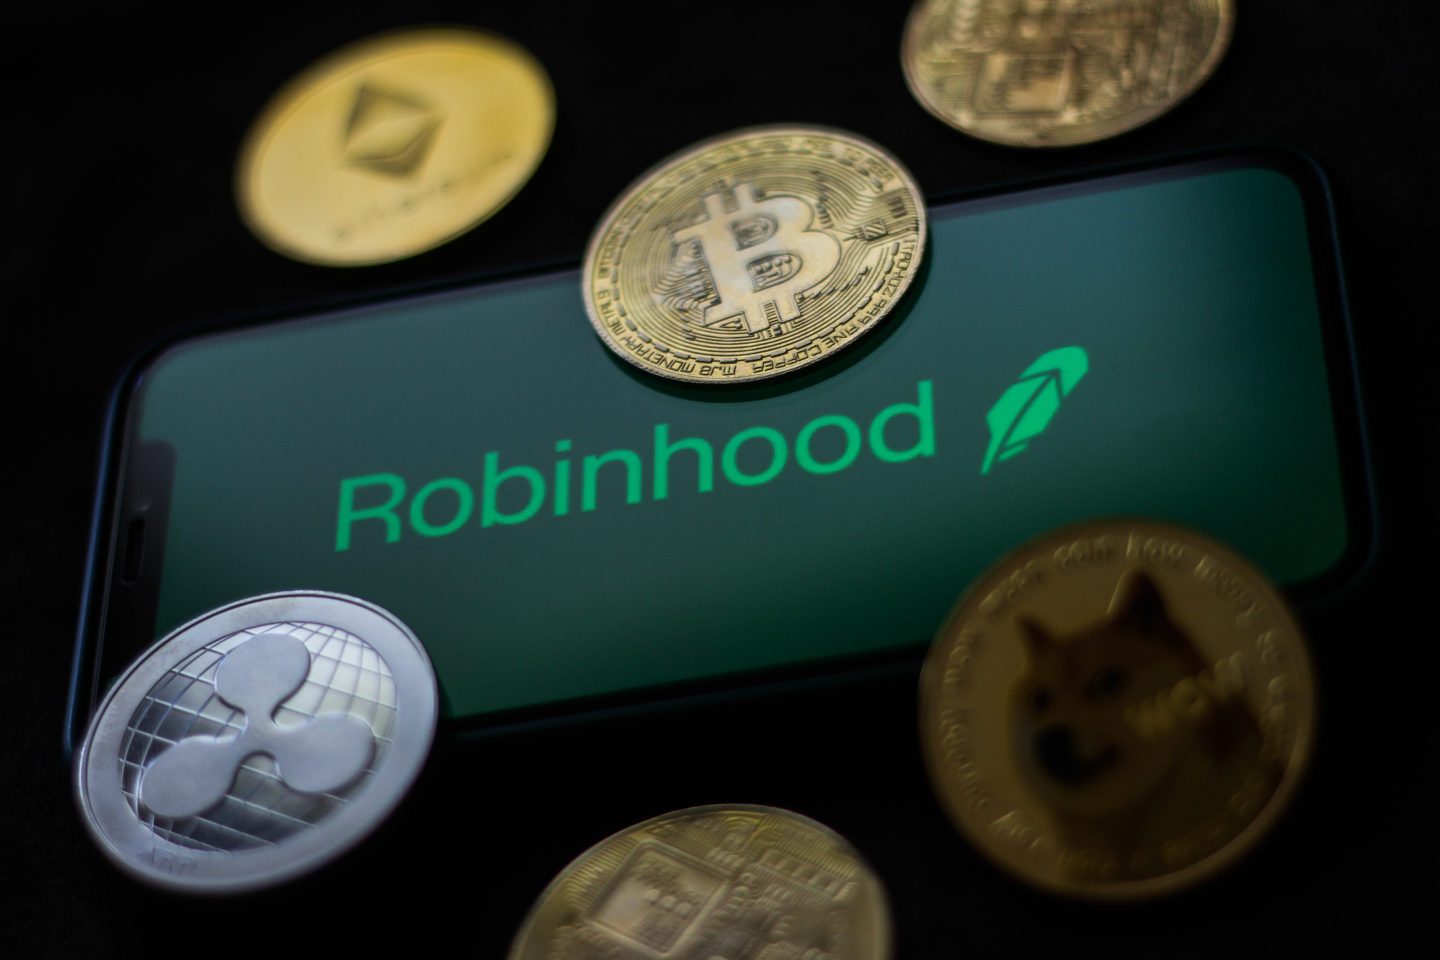 Robinhood's crypto revenue went from $43 million in Q4 to $126 million in Q1.